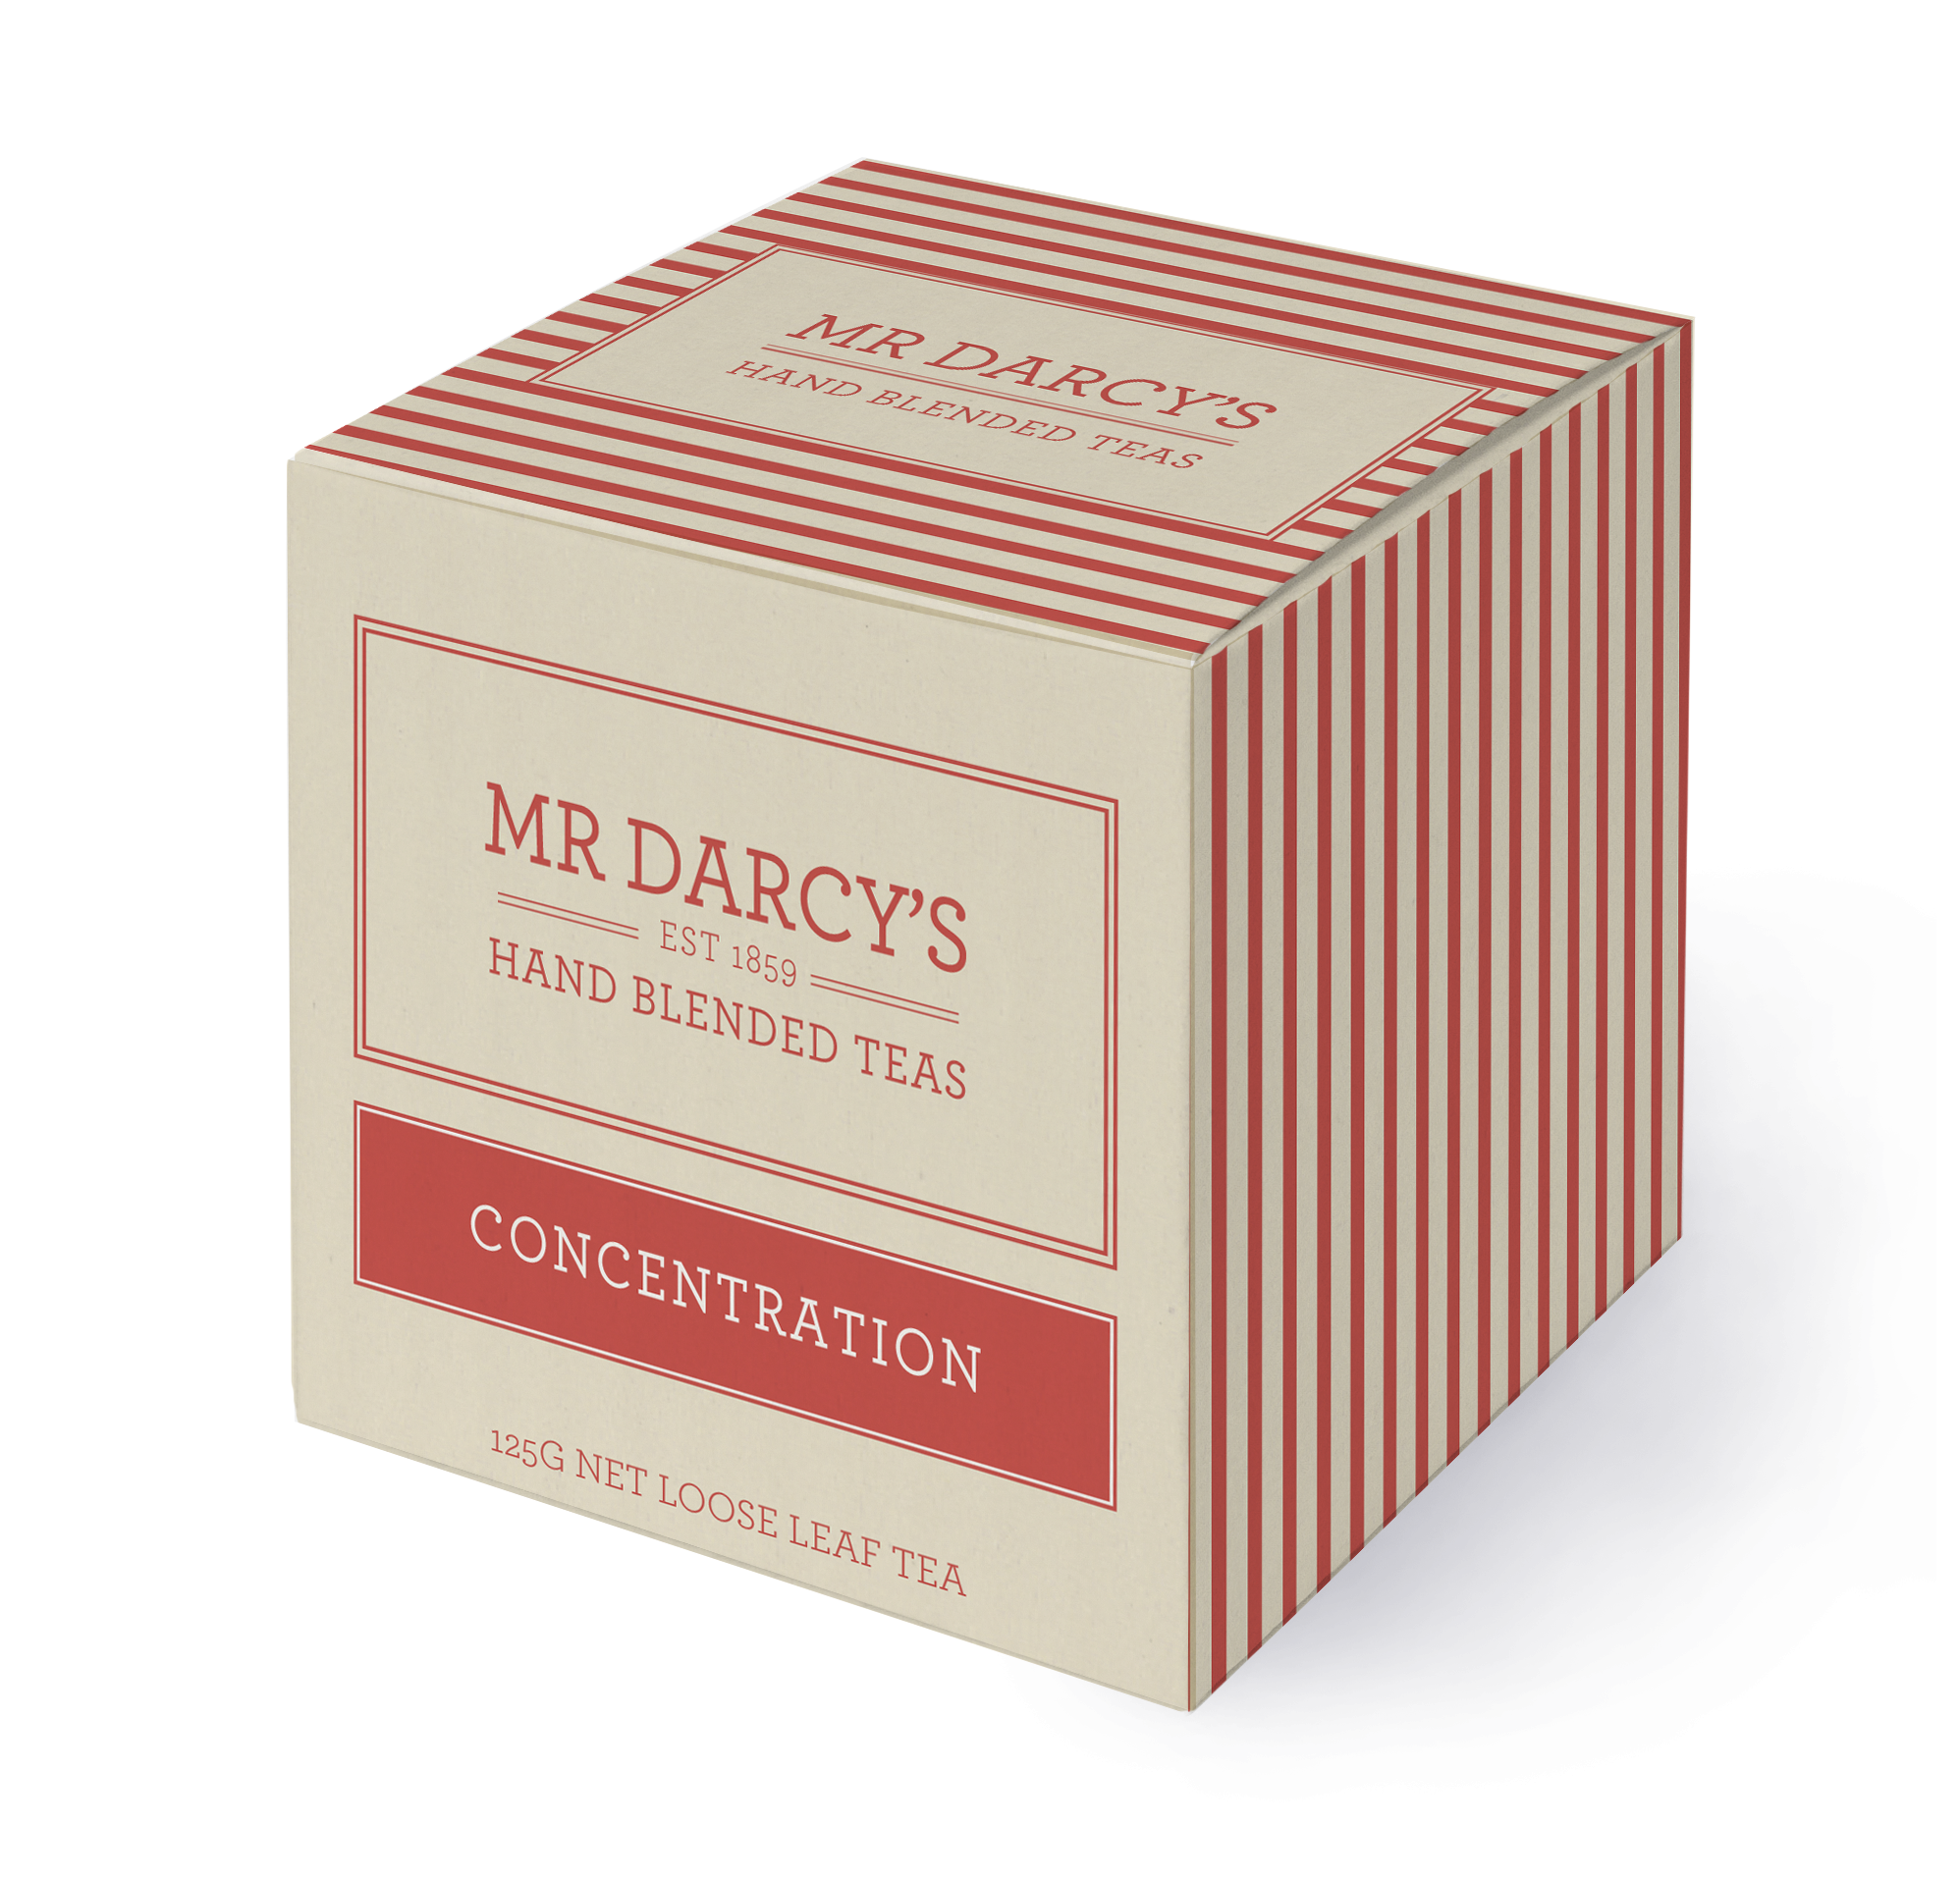 MR DARCY’S – HAND BLENDED TEAS